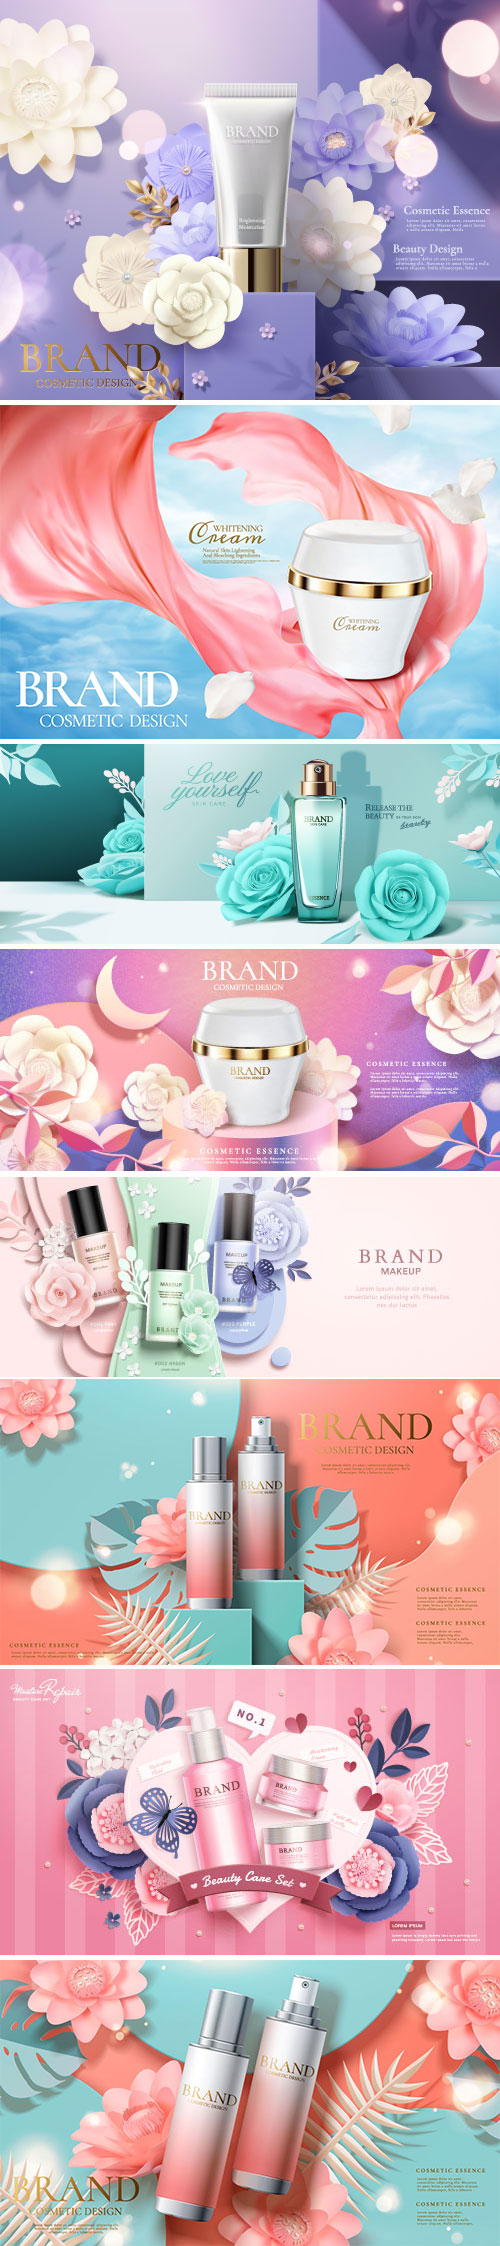 Brand cosmetic design, foundation banner ads # 6